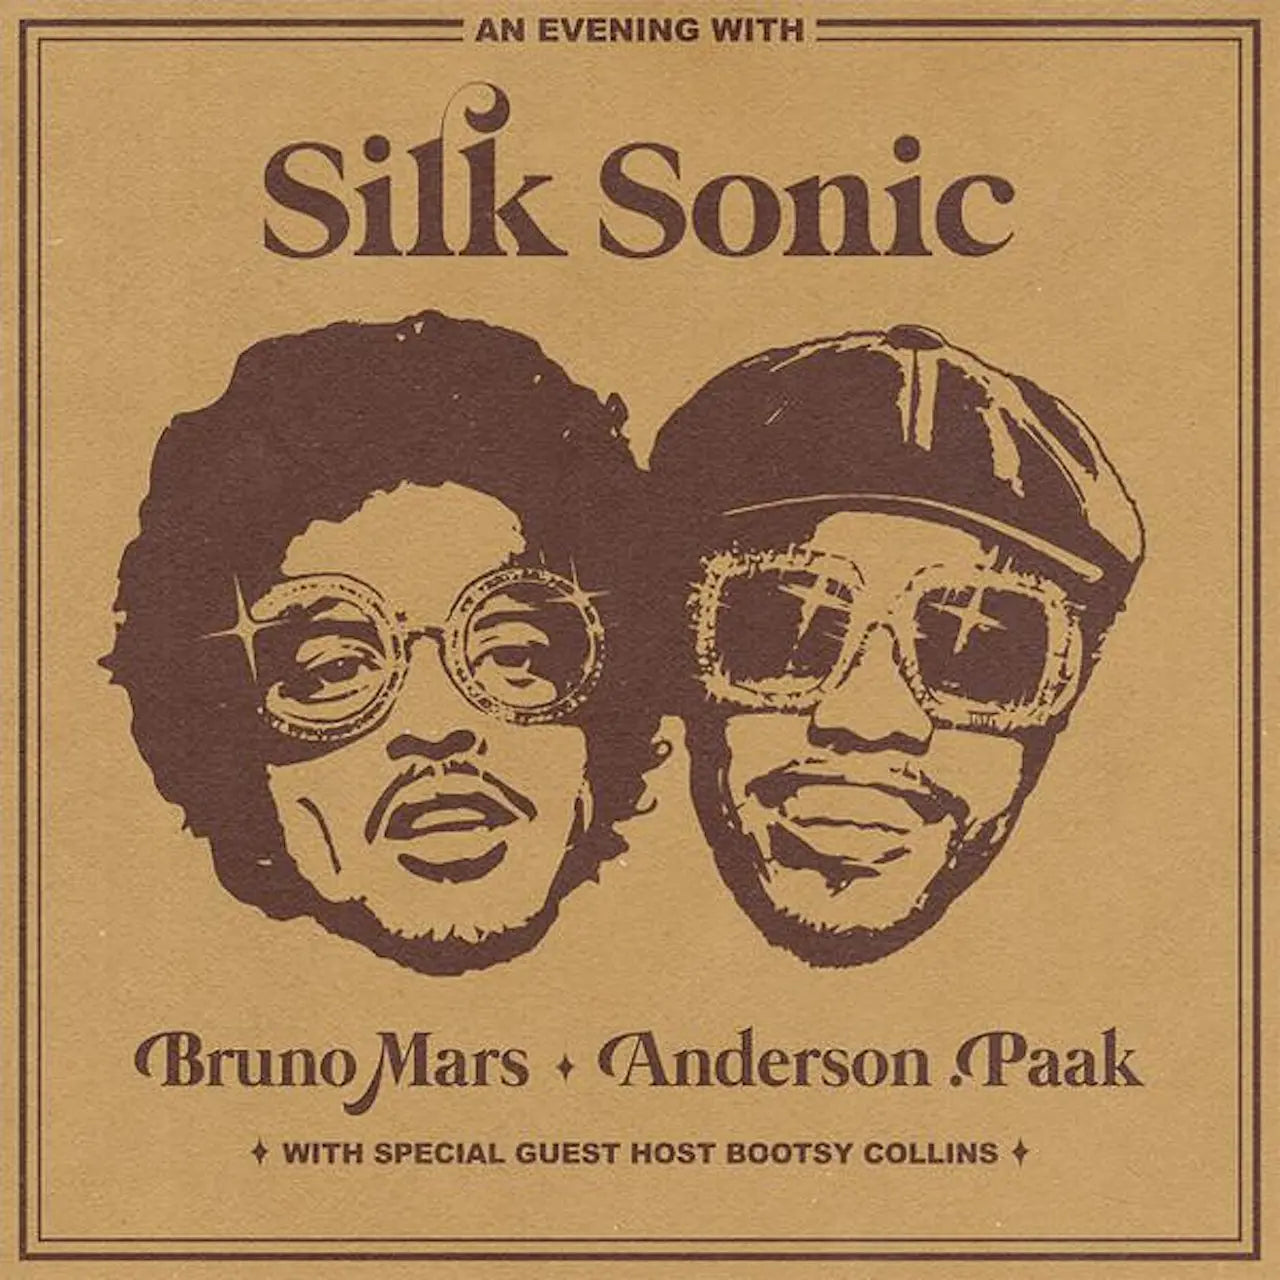 Bruno Mars, Anderson .Paak, Silk Sonic - An Evening With Silk Sonic [Deluxe Edition Vinyl LP]